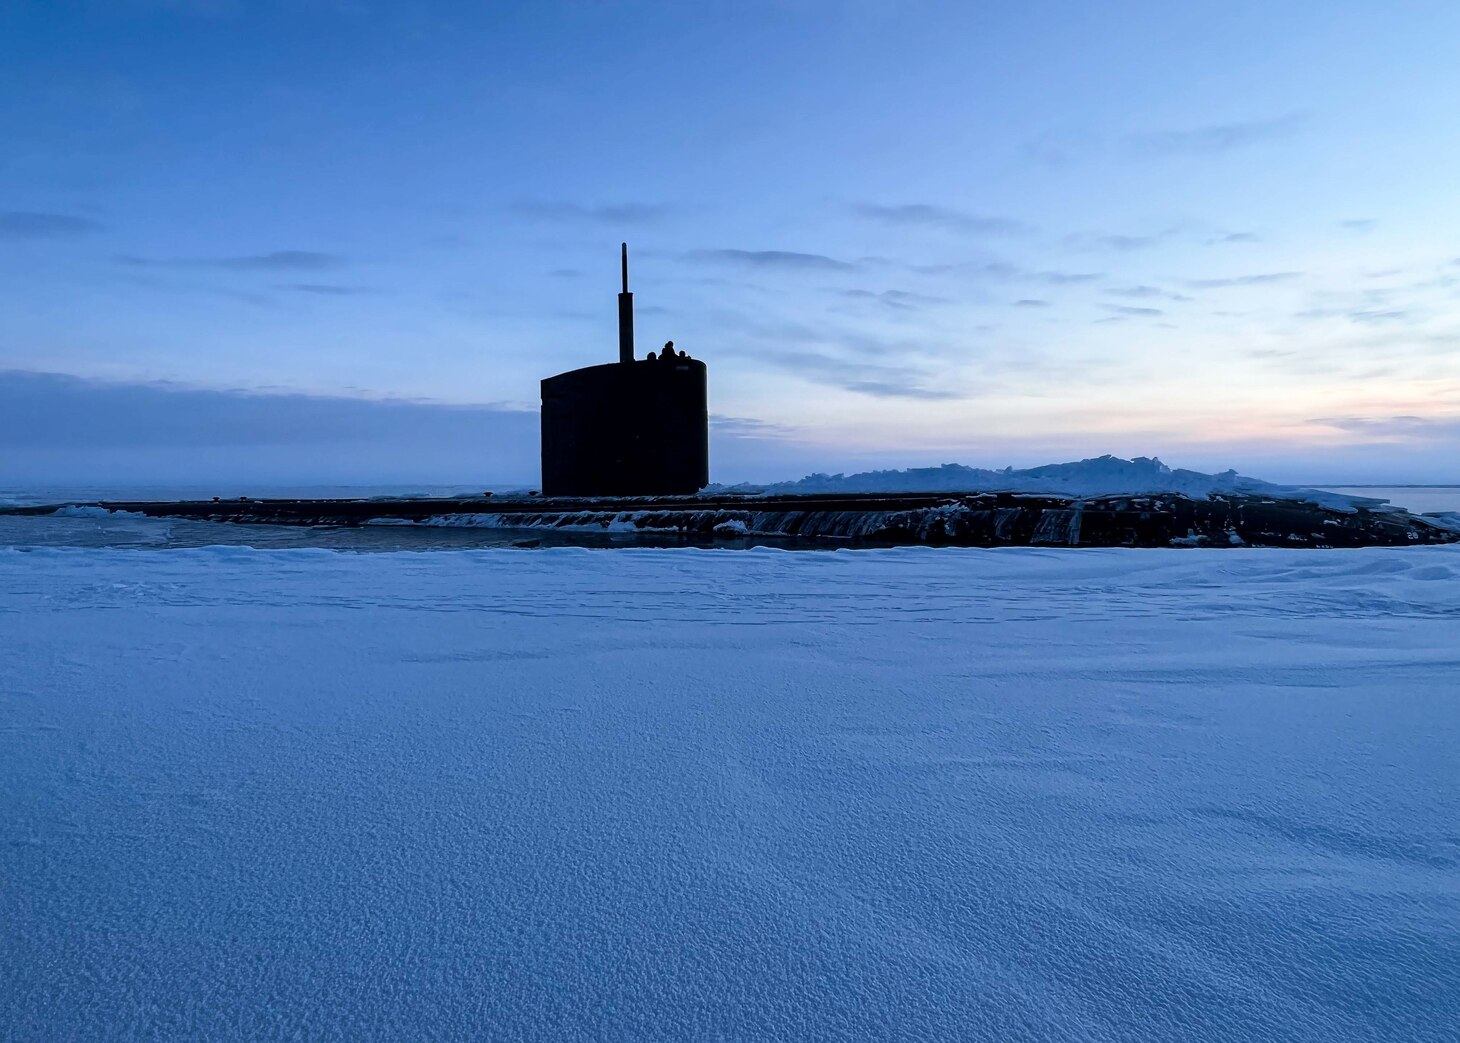 Los Angeles-class fast-attack submarine USS Pasadena (SSN 752) surfaces in the Beaufort Sea March 5, 2022, kicking off Ice Exercise (ICEX) 2022.